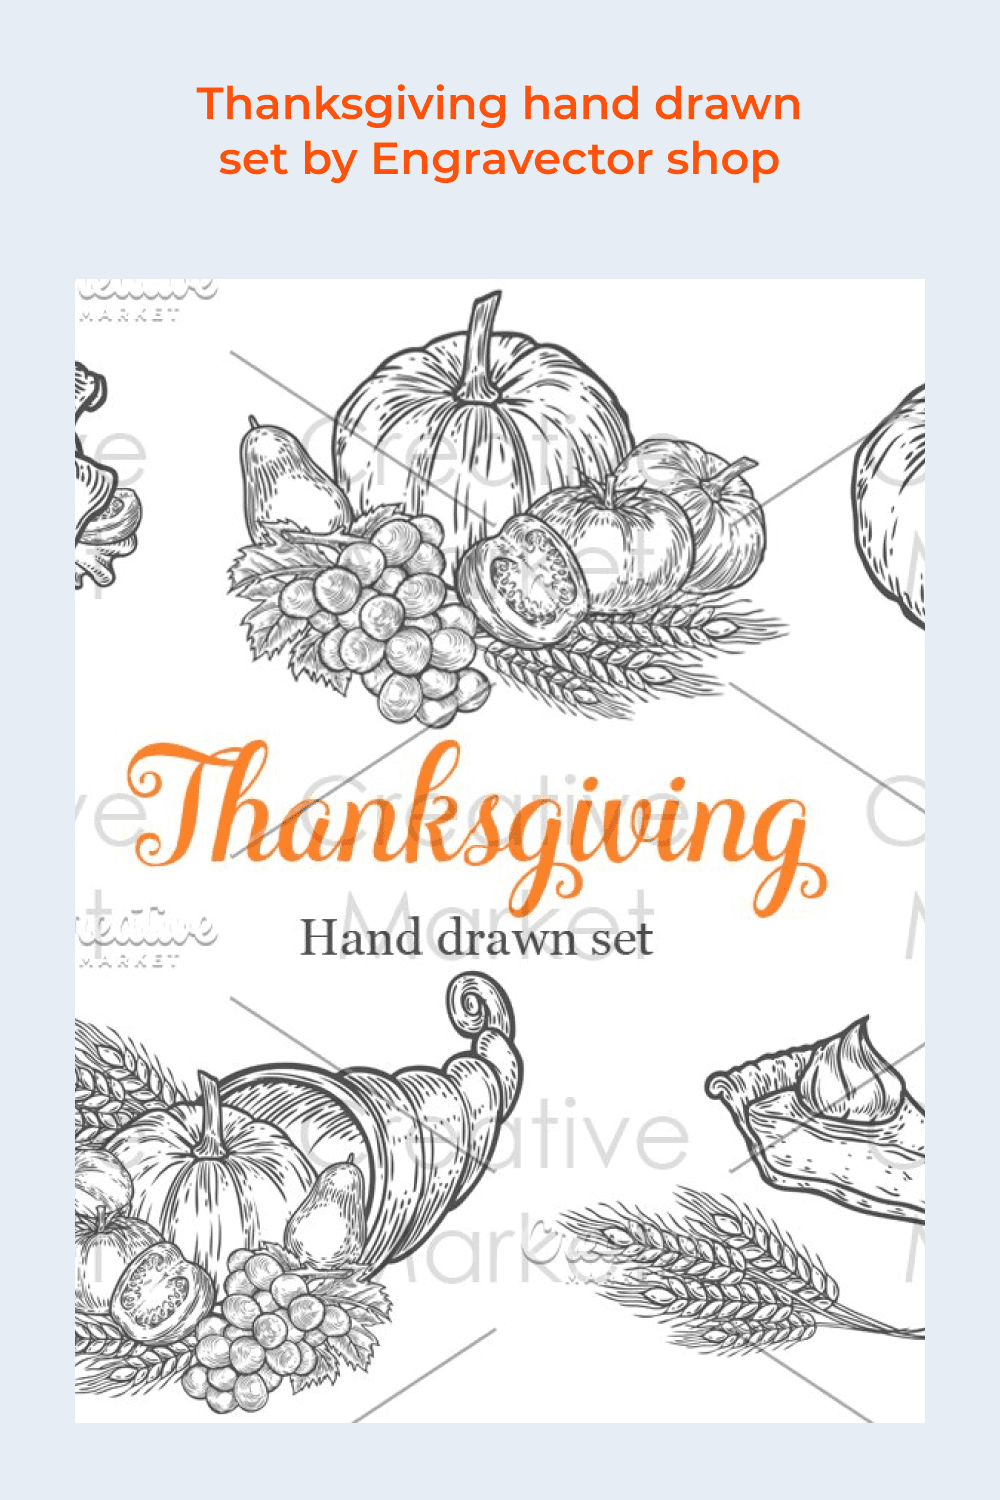 Thanksgiving hand drawn set by Engravector shop.